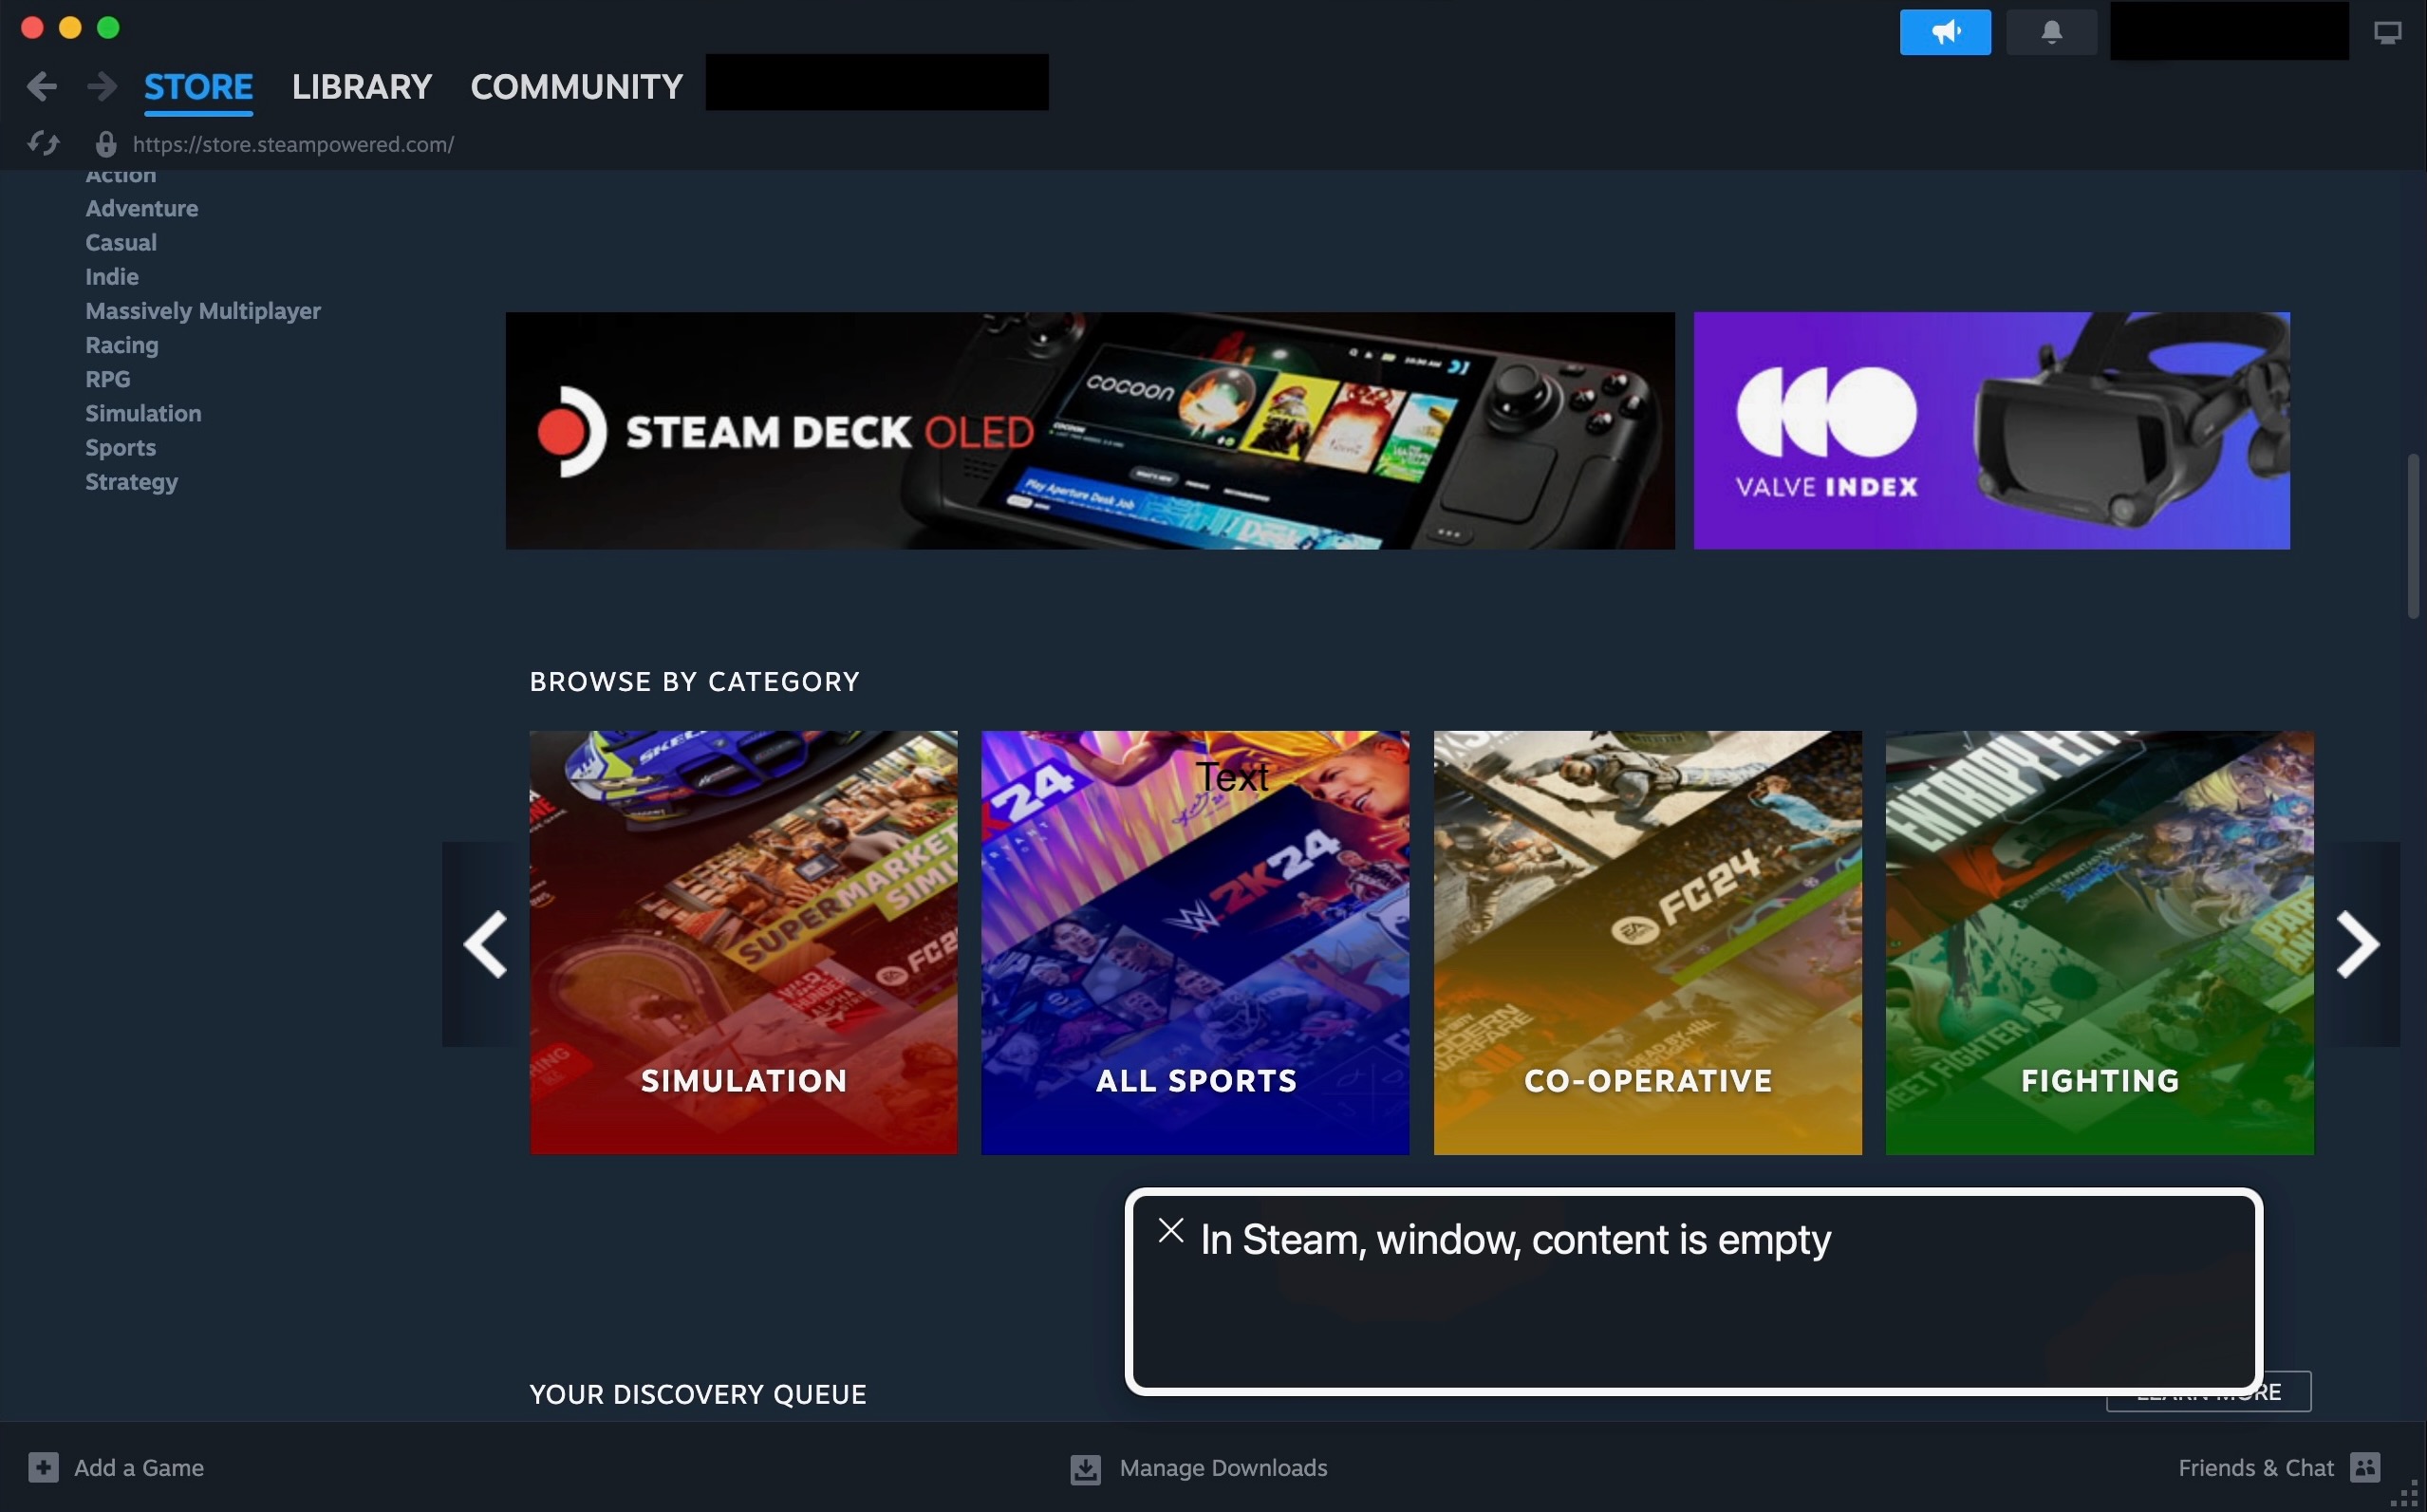 Voiceover can't capture anything in the Steam desktop client. It reads: "In Steam, window, content is empty"